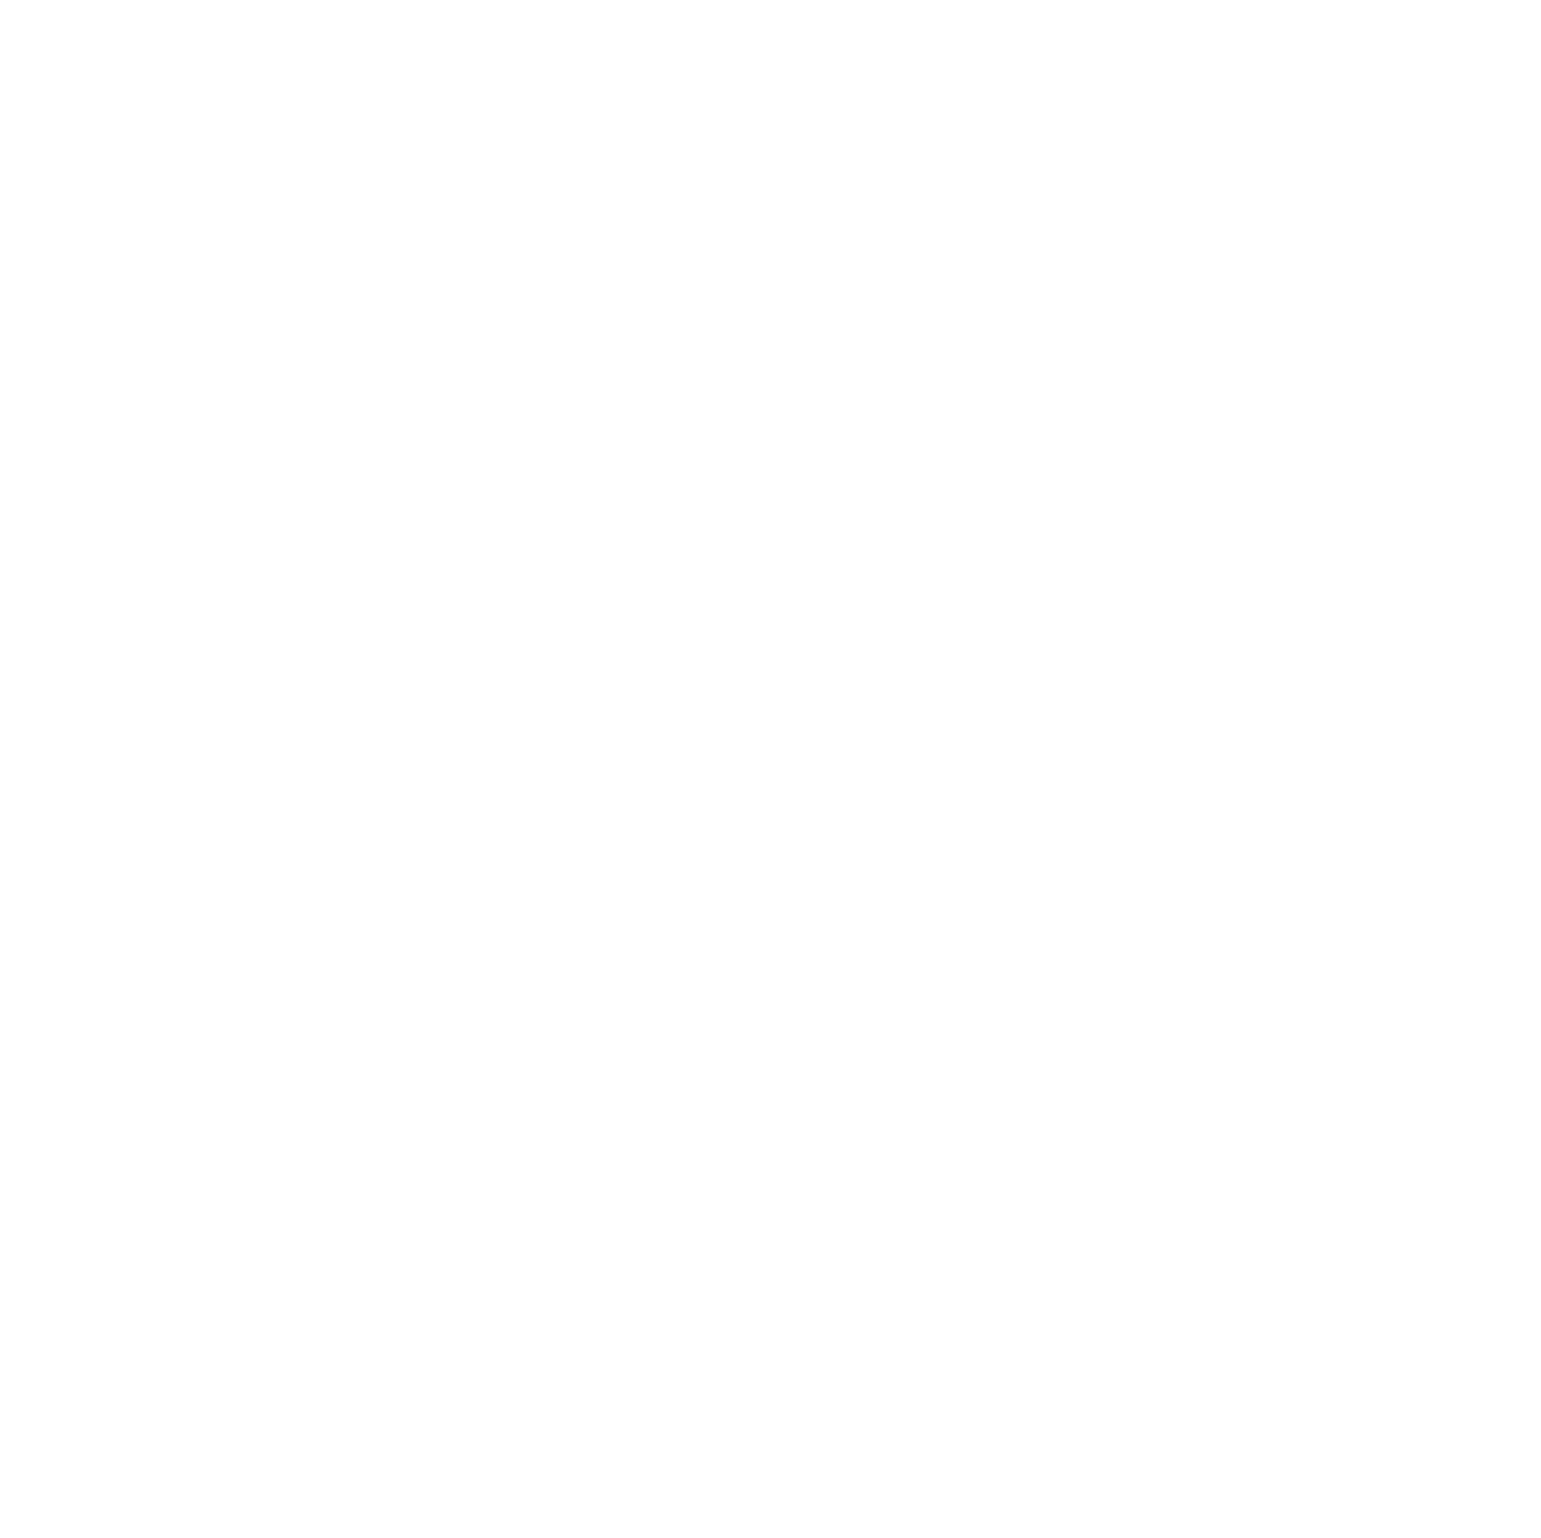 PCB Bancorp logo for dark backgrounds (transparent PNG)